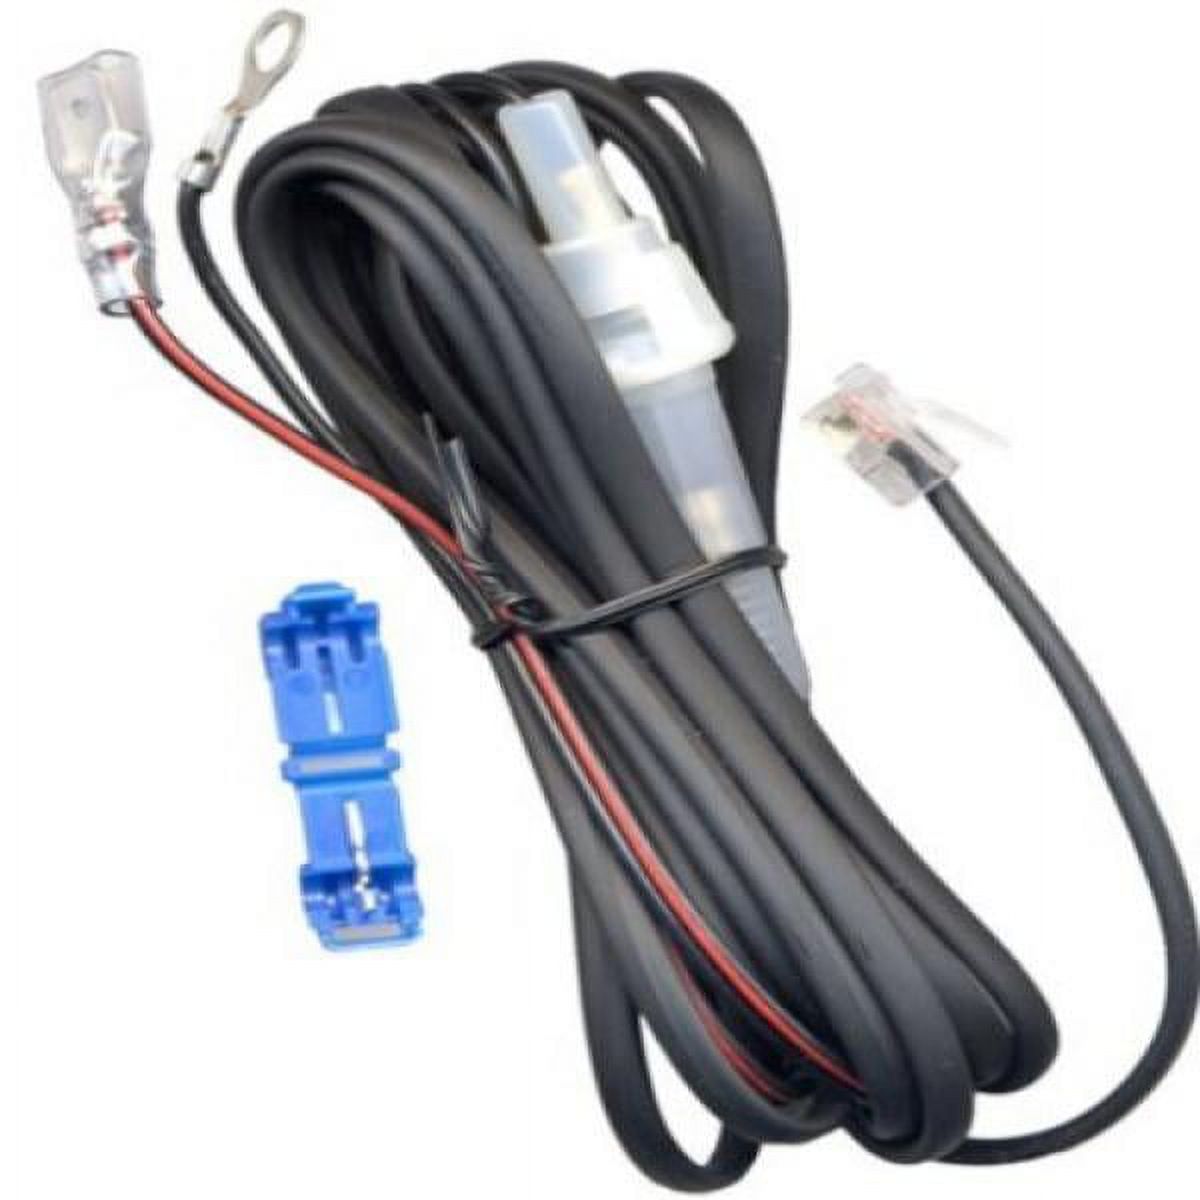 Direct Wire Connection Cord for Escort Radar Detectors - image 1 of 2